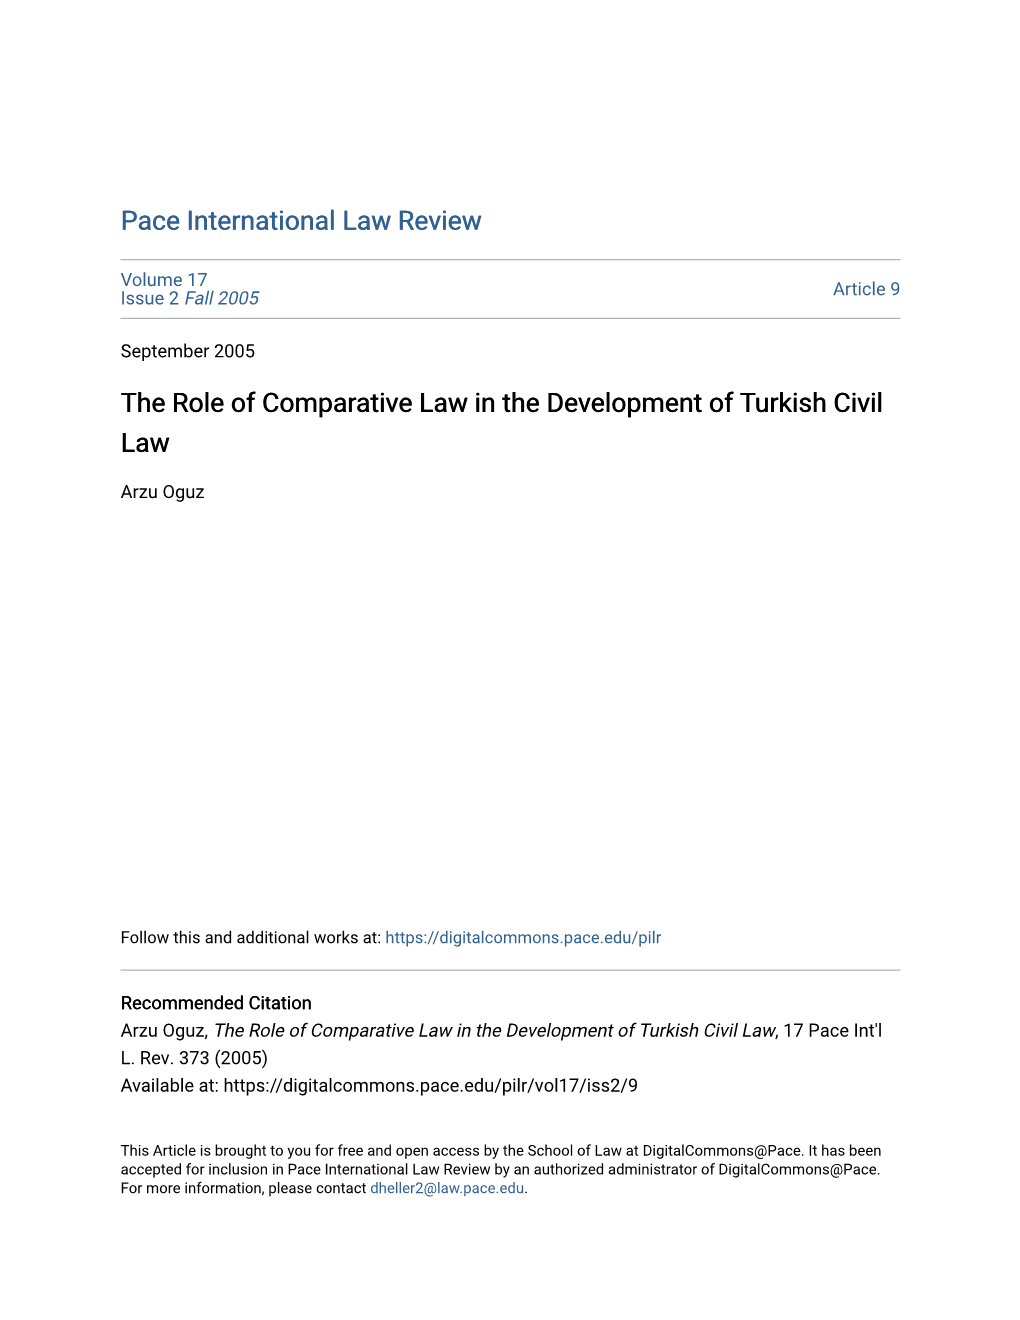 The Role of Comparative Law in the Development of Turkish Civil Law